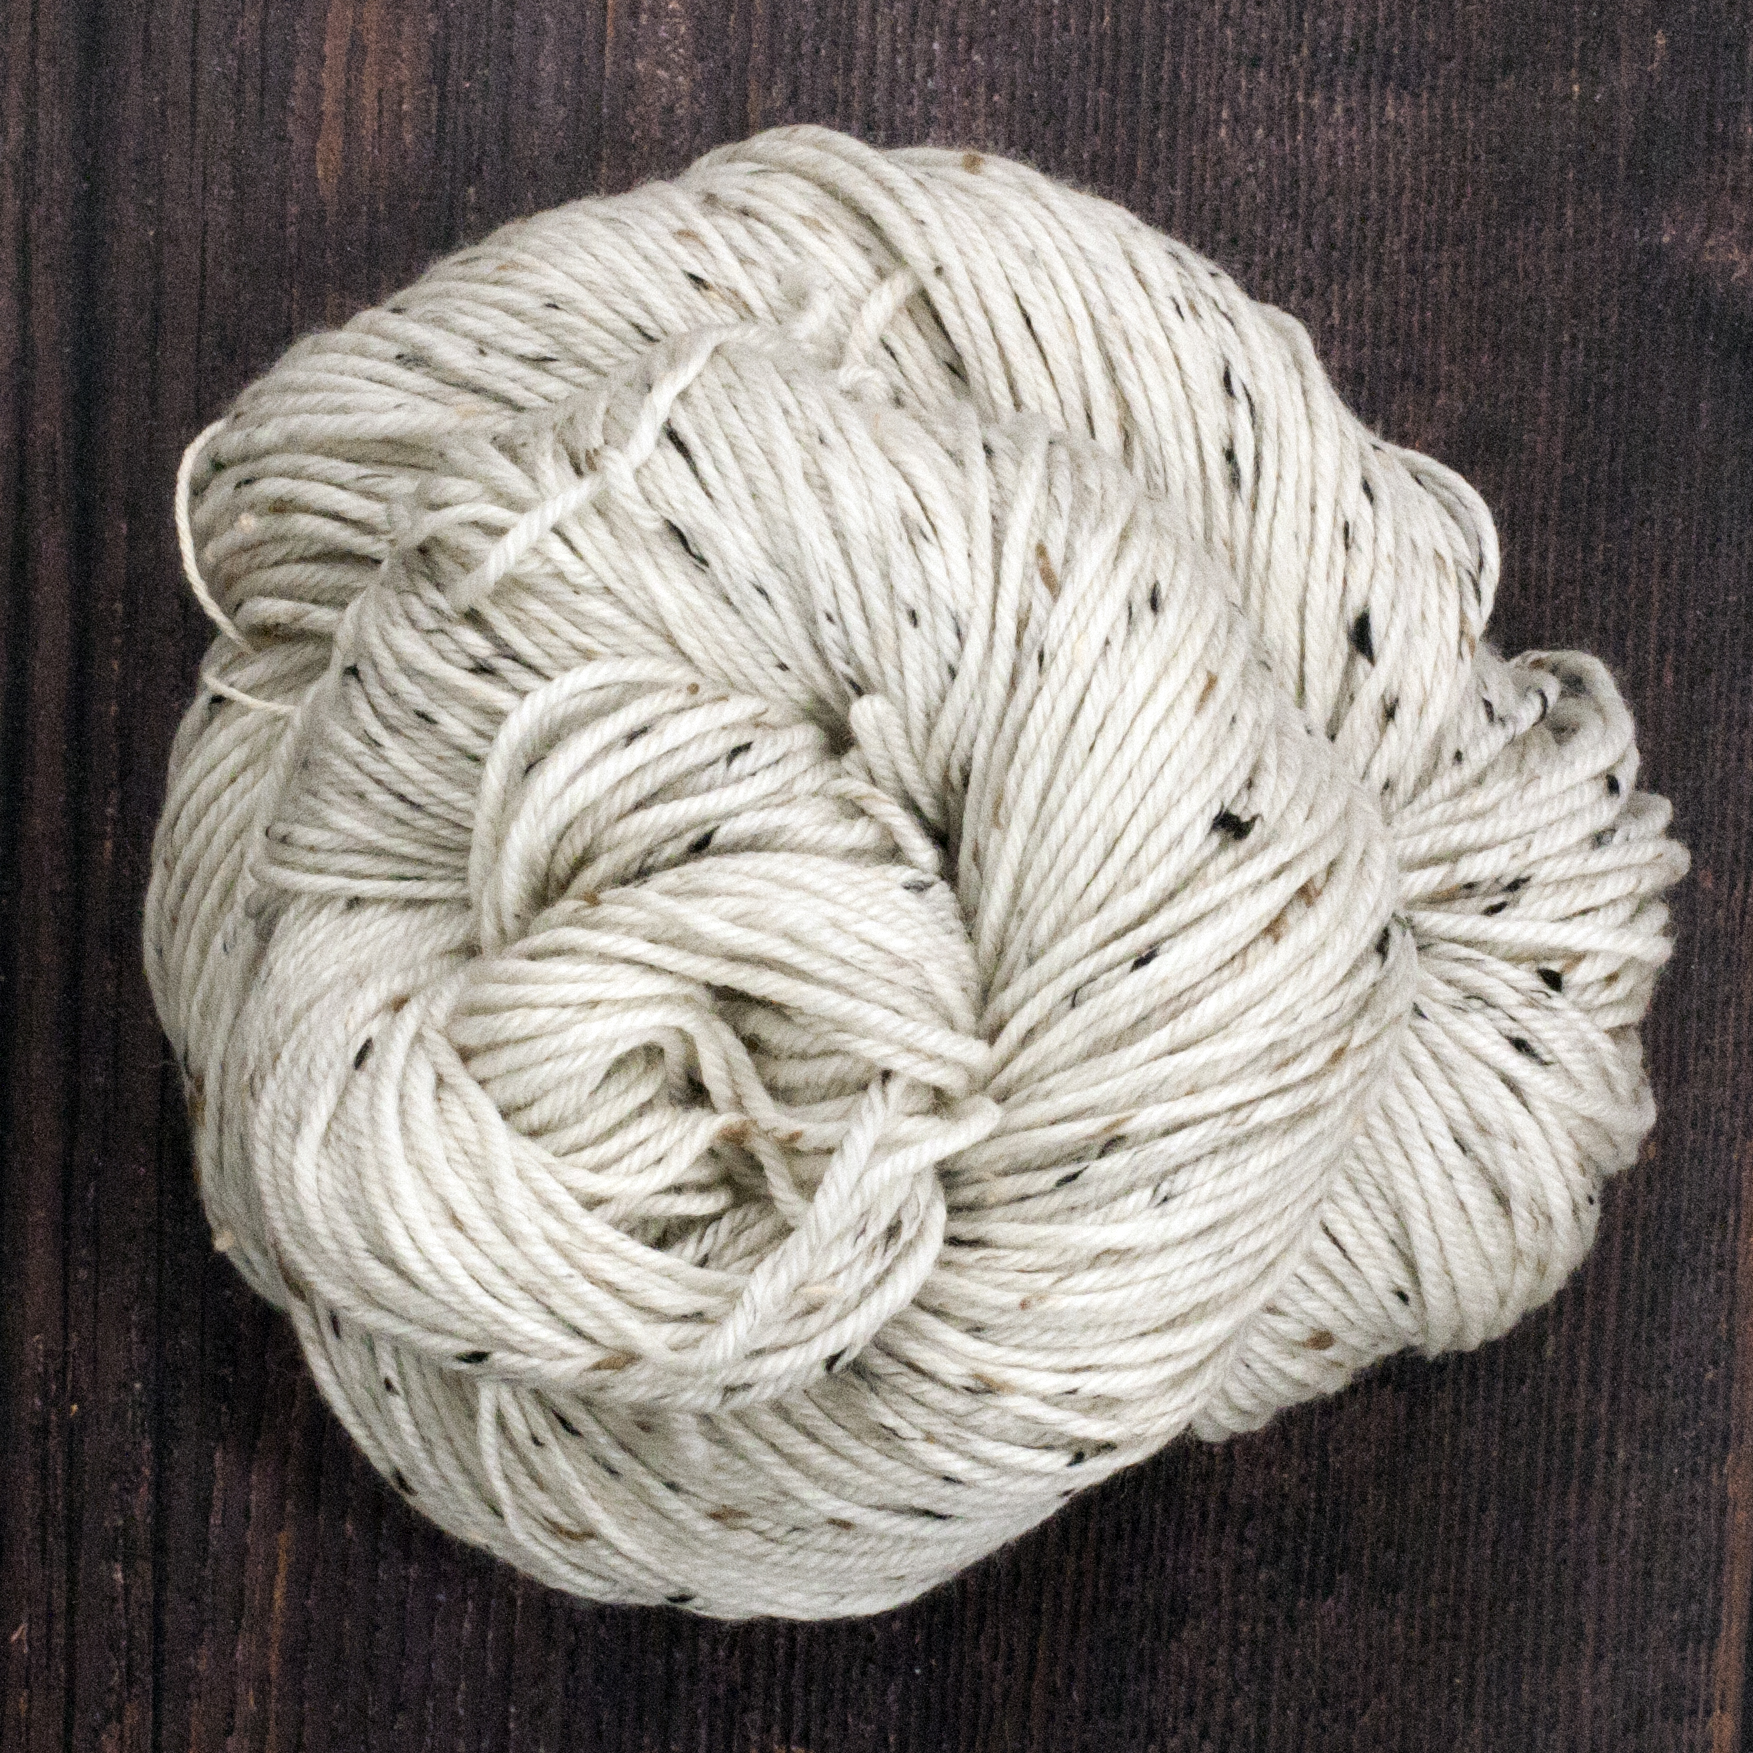 CHESTER WOOL CO - DK undyed yarns for dyeing.